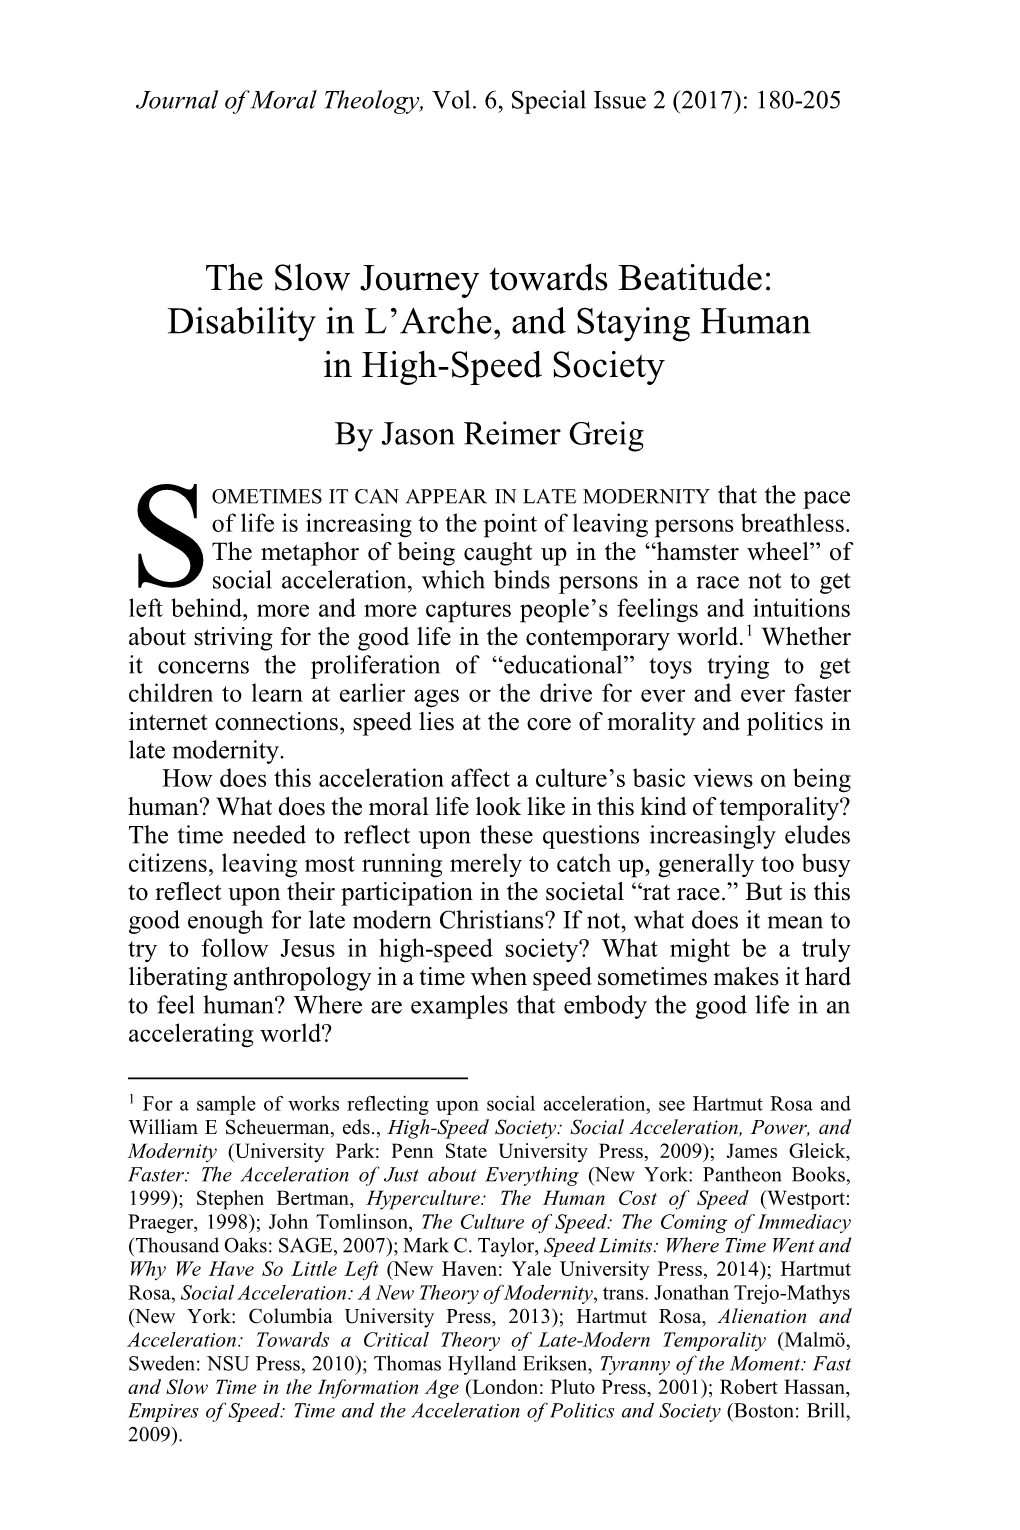 The Slow Journey Towards Beatitude: Disability in L'arche, and Staying